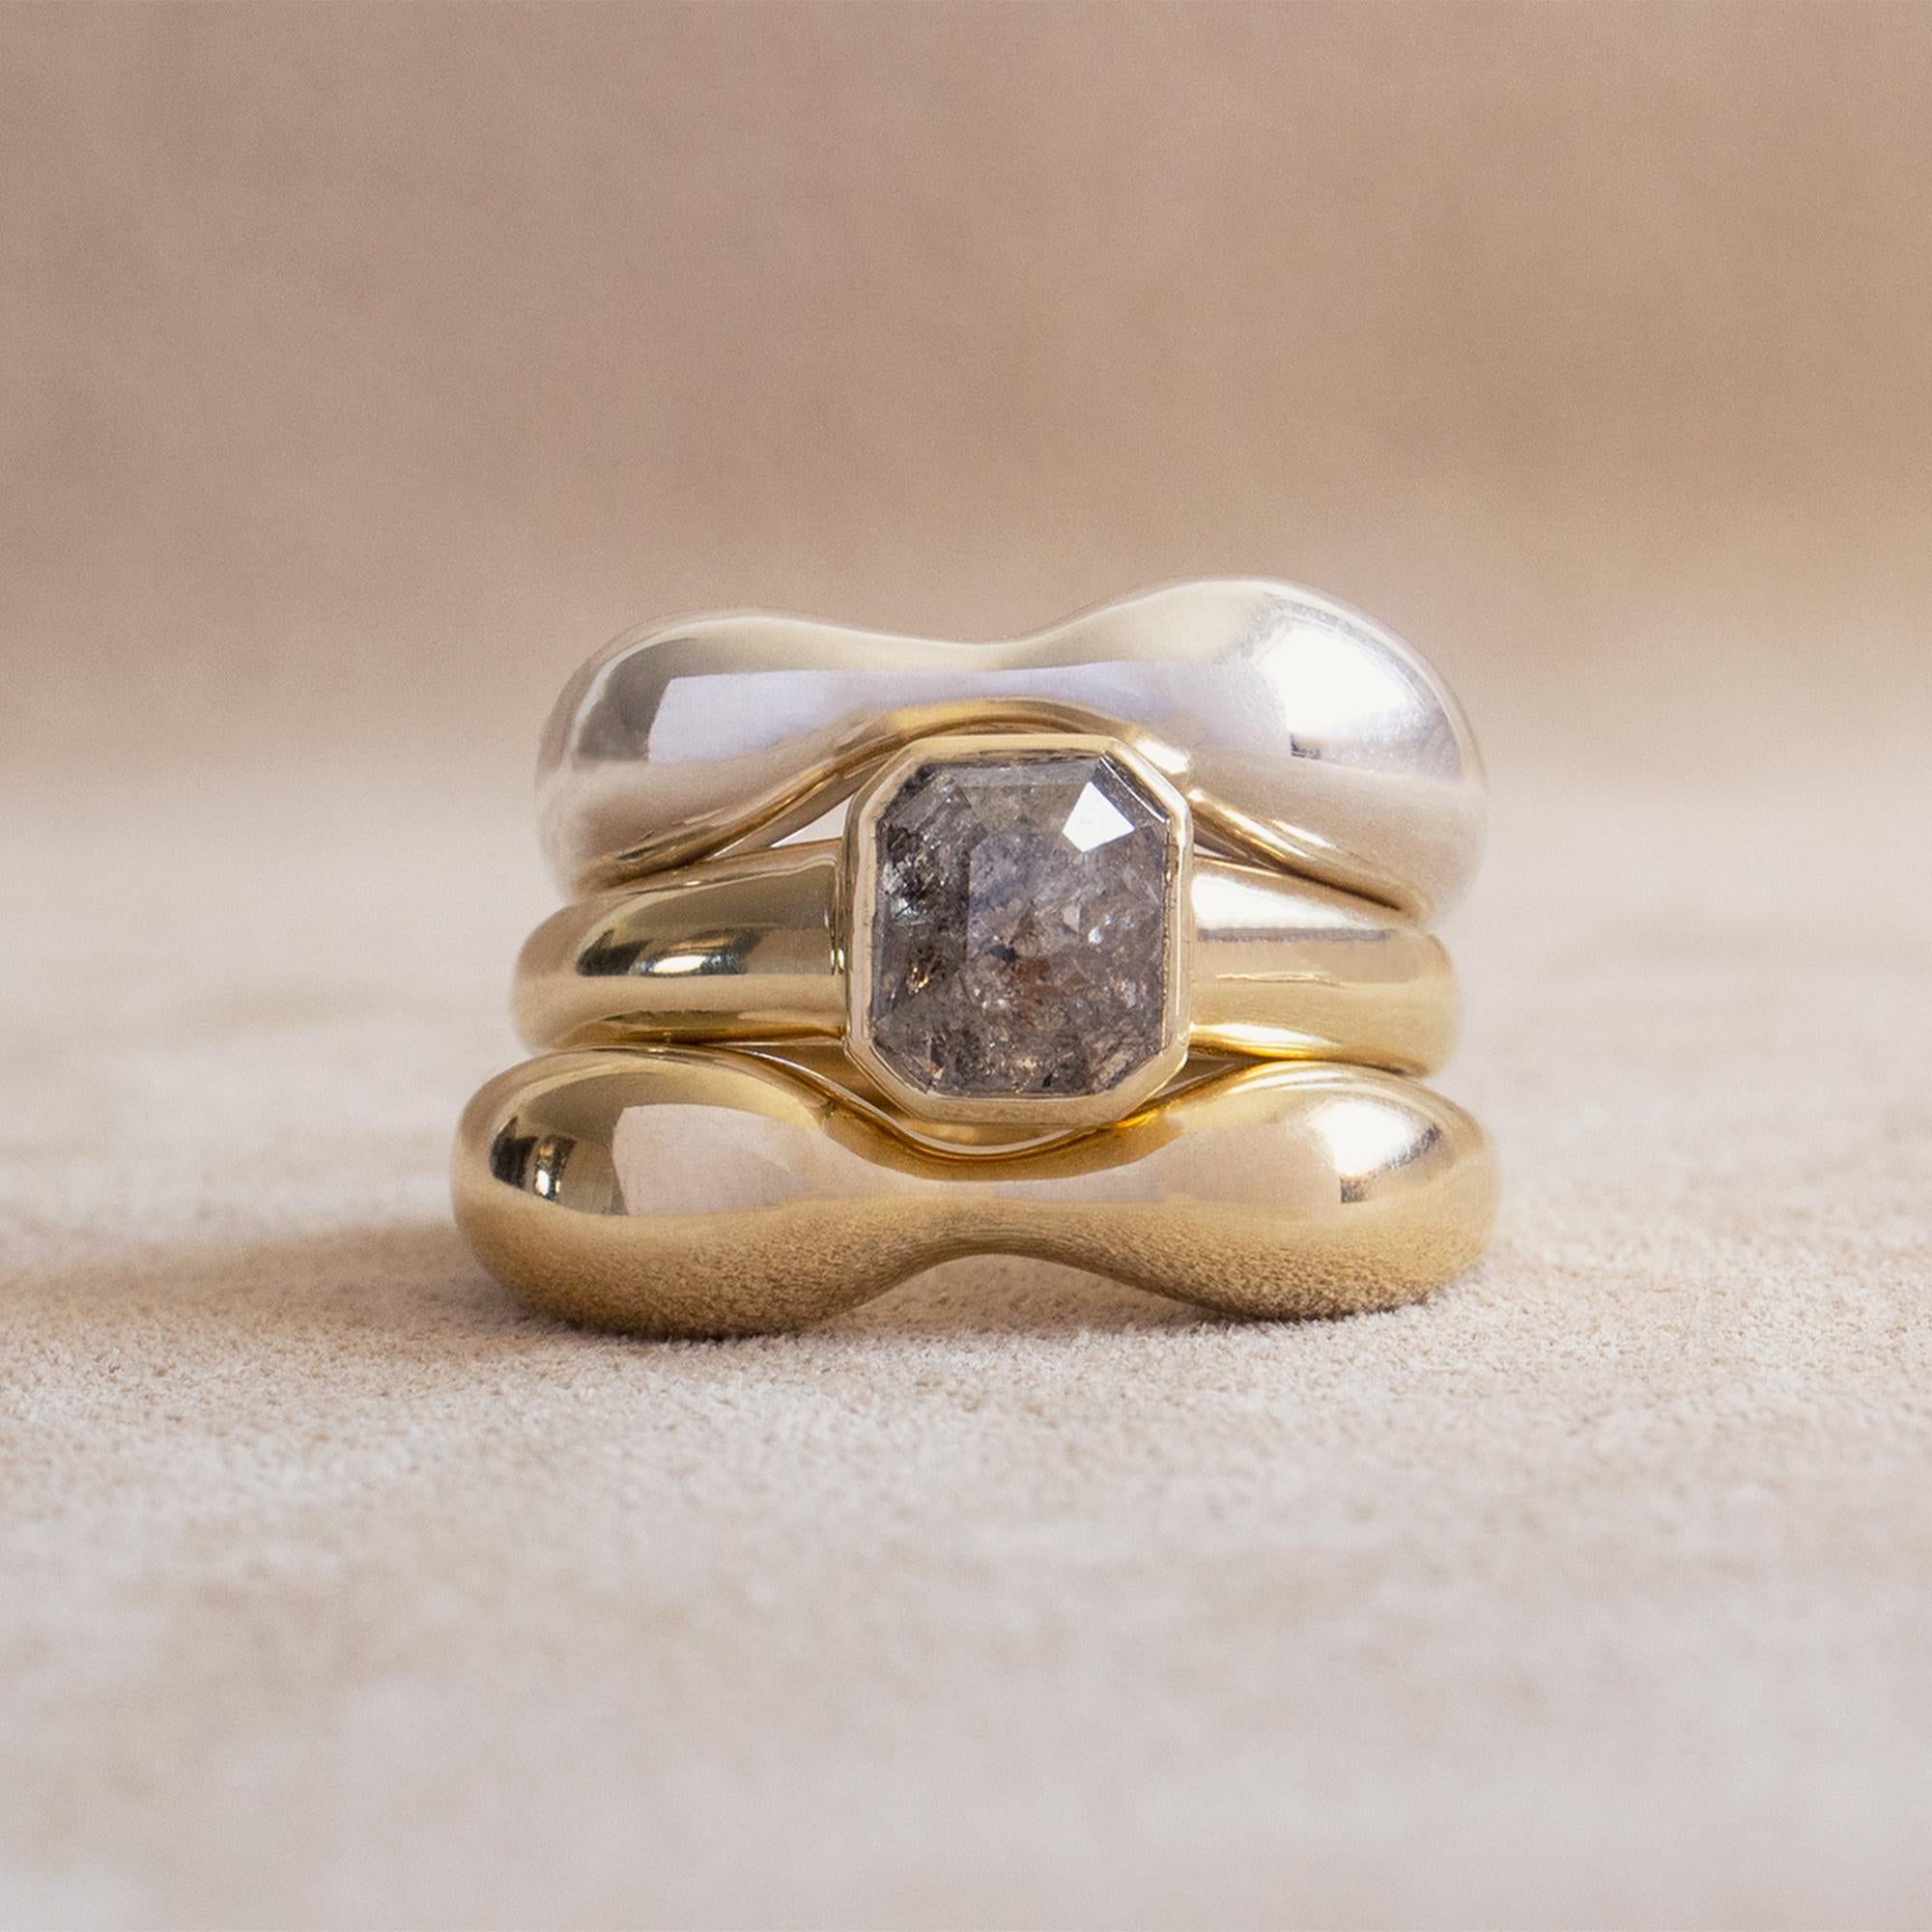 M. Hisae Modernist Organic Sculptural Gold Ring In New Condition For Sale In Woodbury, CT